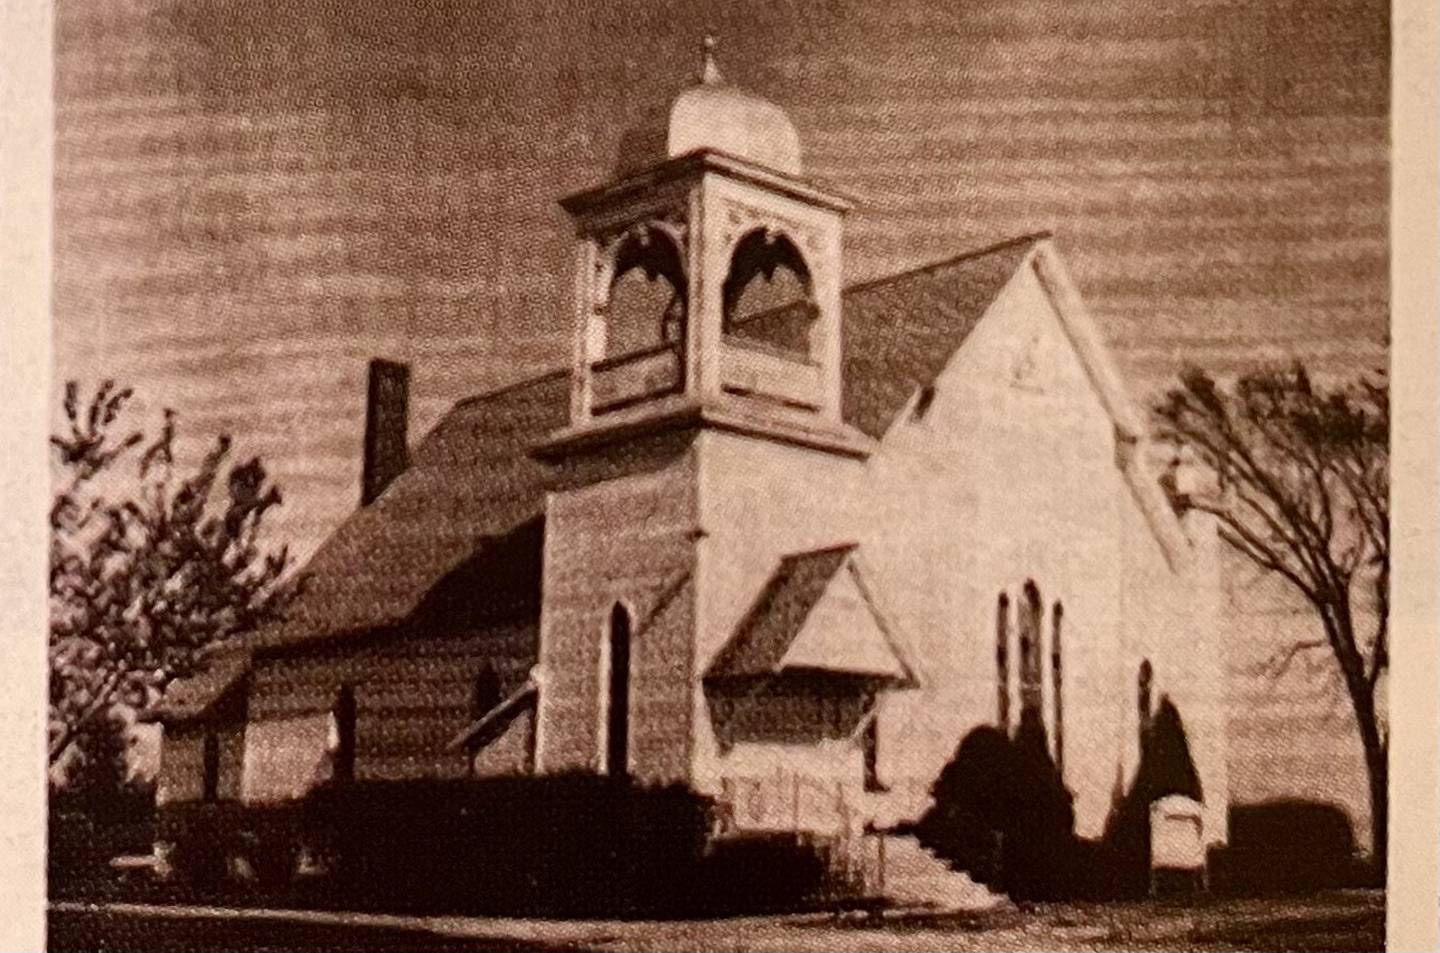 The United Methodist Church of Cortland at 45 West Chestnut St. (photo provided)